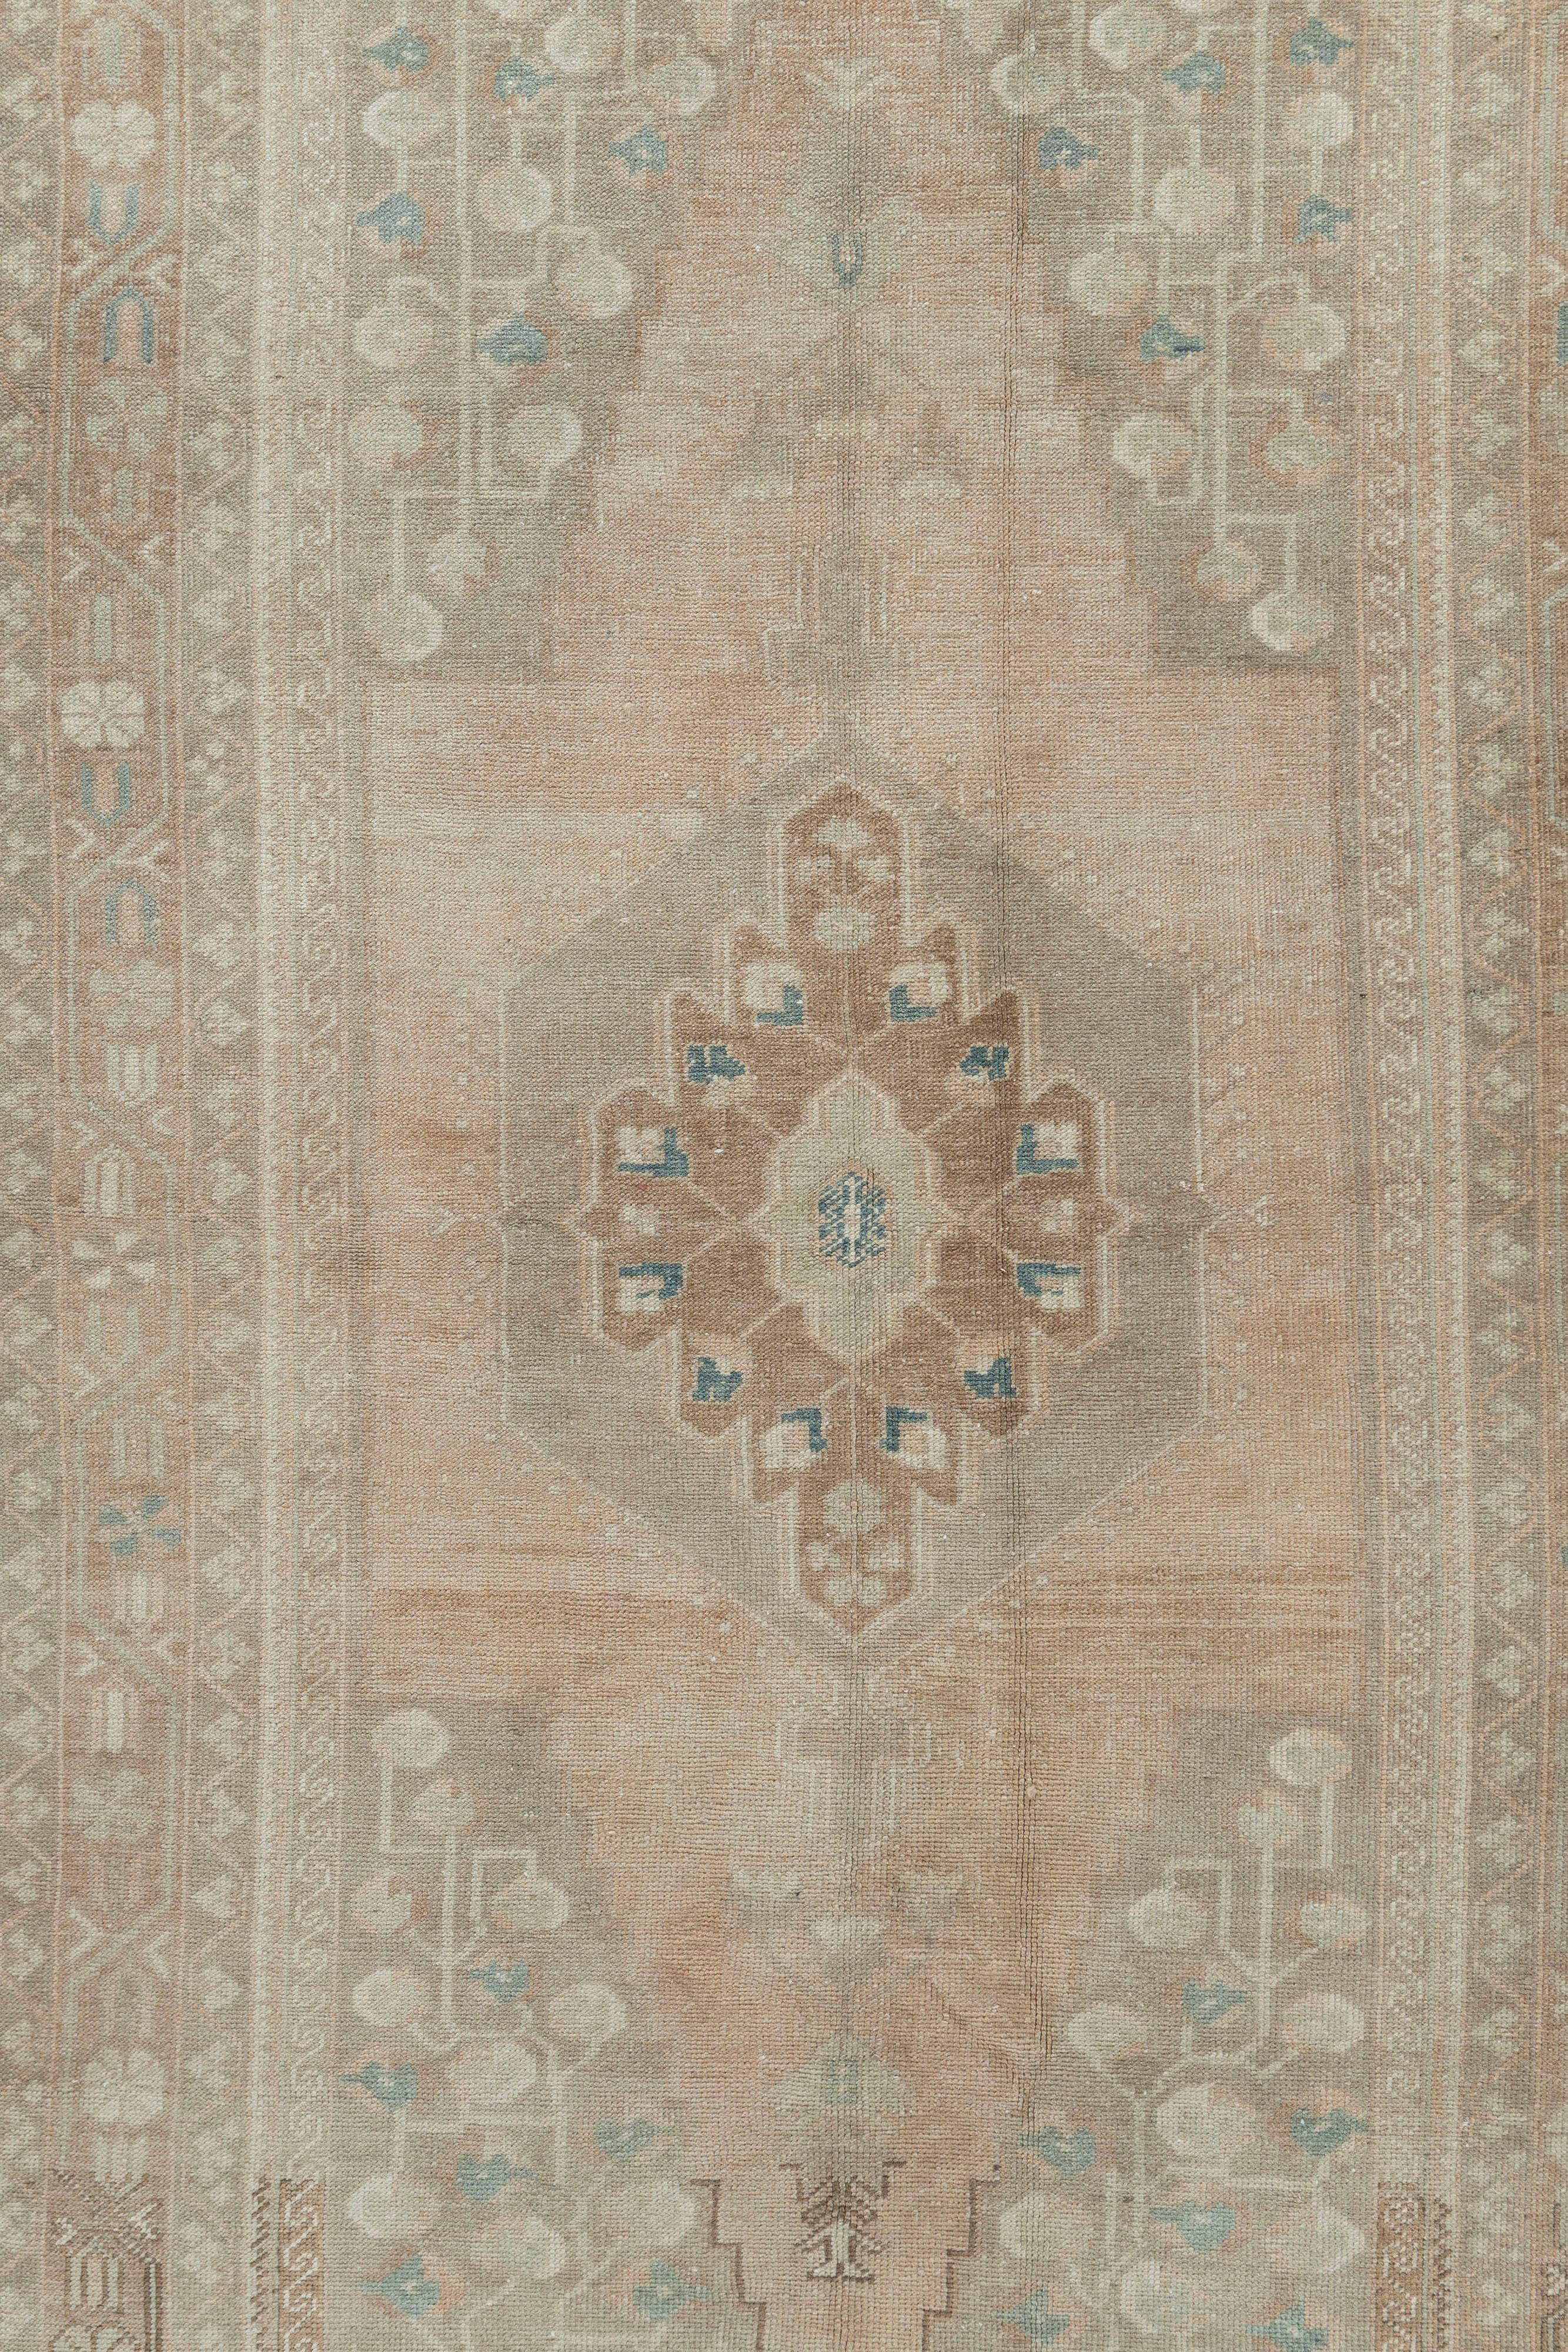 Vintage Turkish Oushak Rug Runner 3'9 X 7'1. Oushak's are known for their soft palettes combined with eccentric drawing. Oushak in western Turkey has the longest continuous rug weaving history, stretching back at least to the mid-fifteenth century.